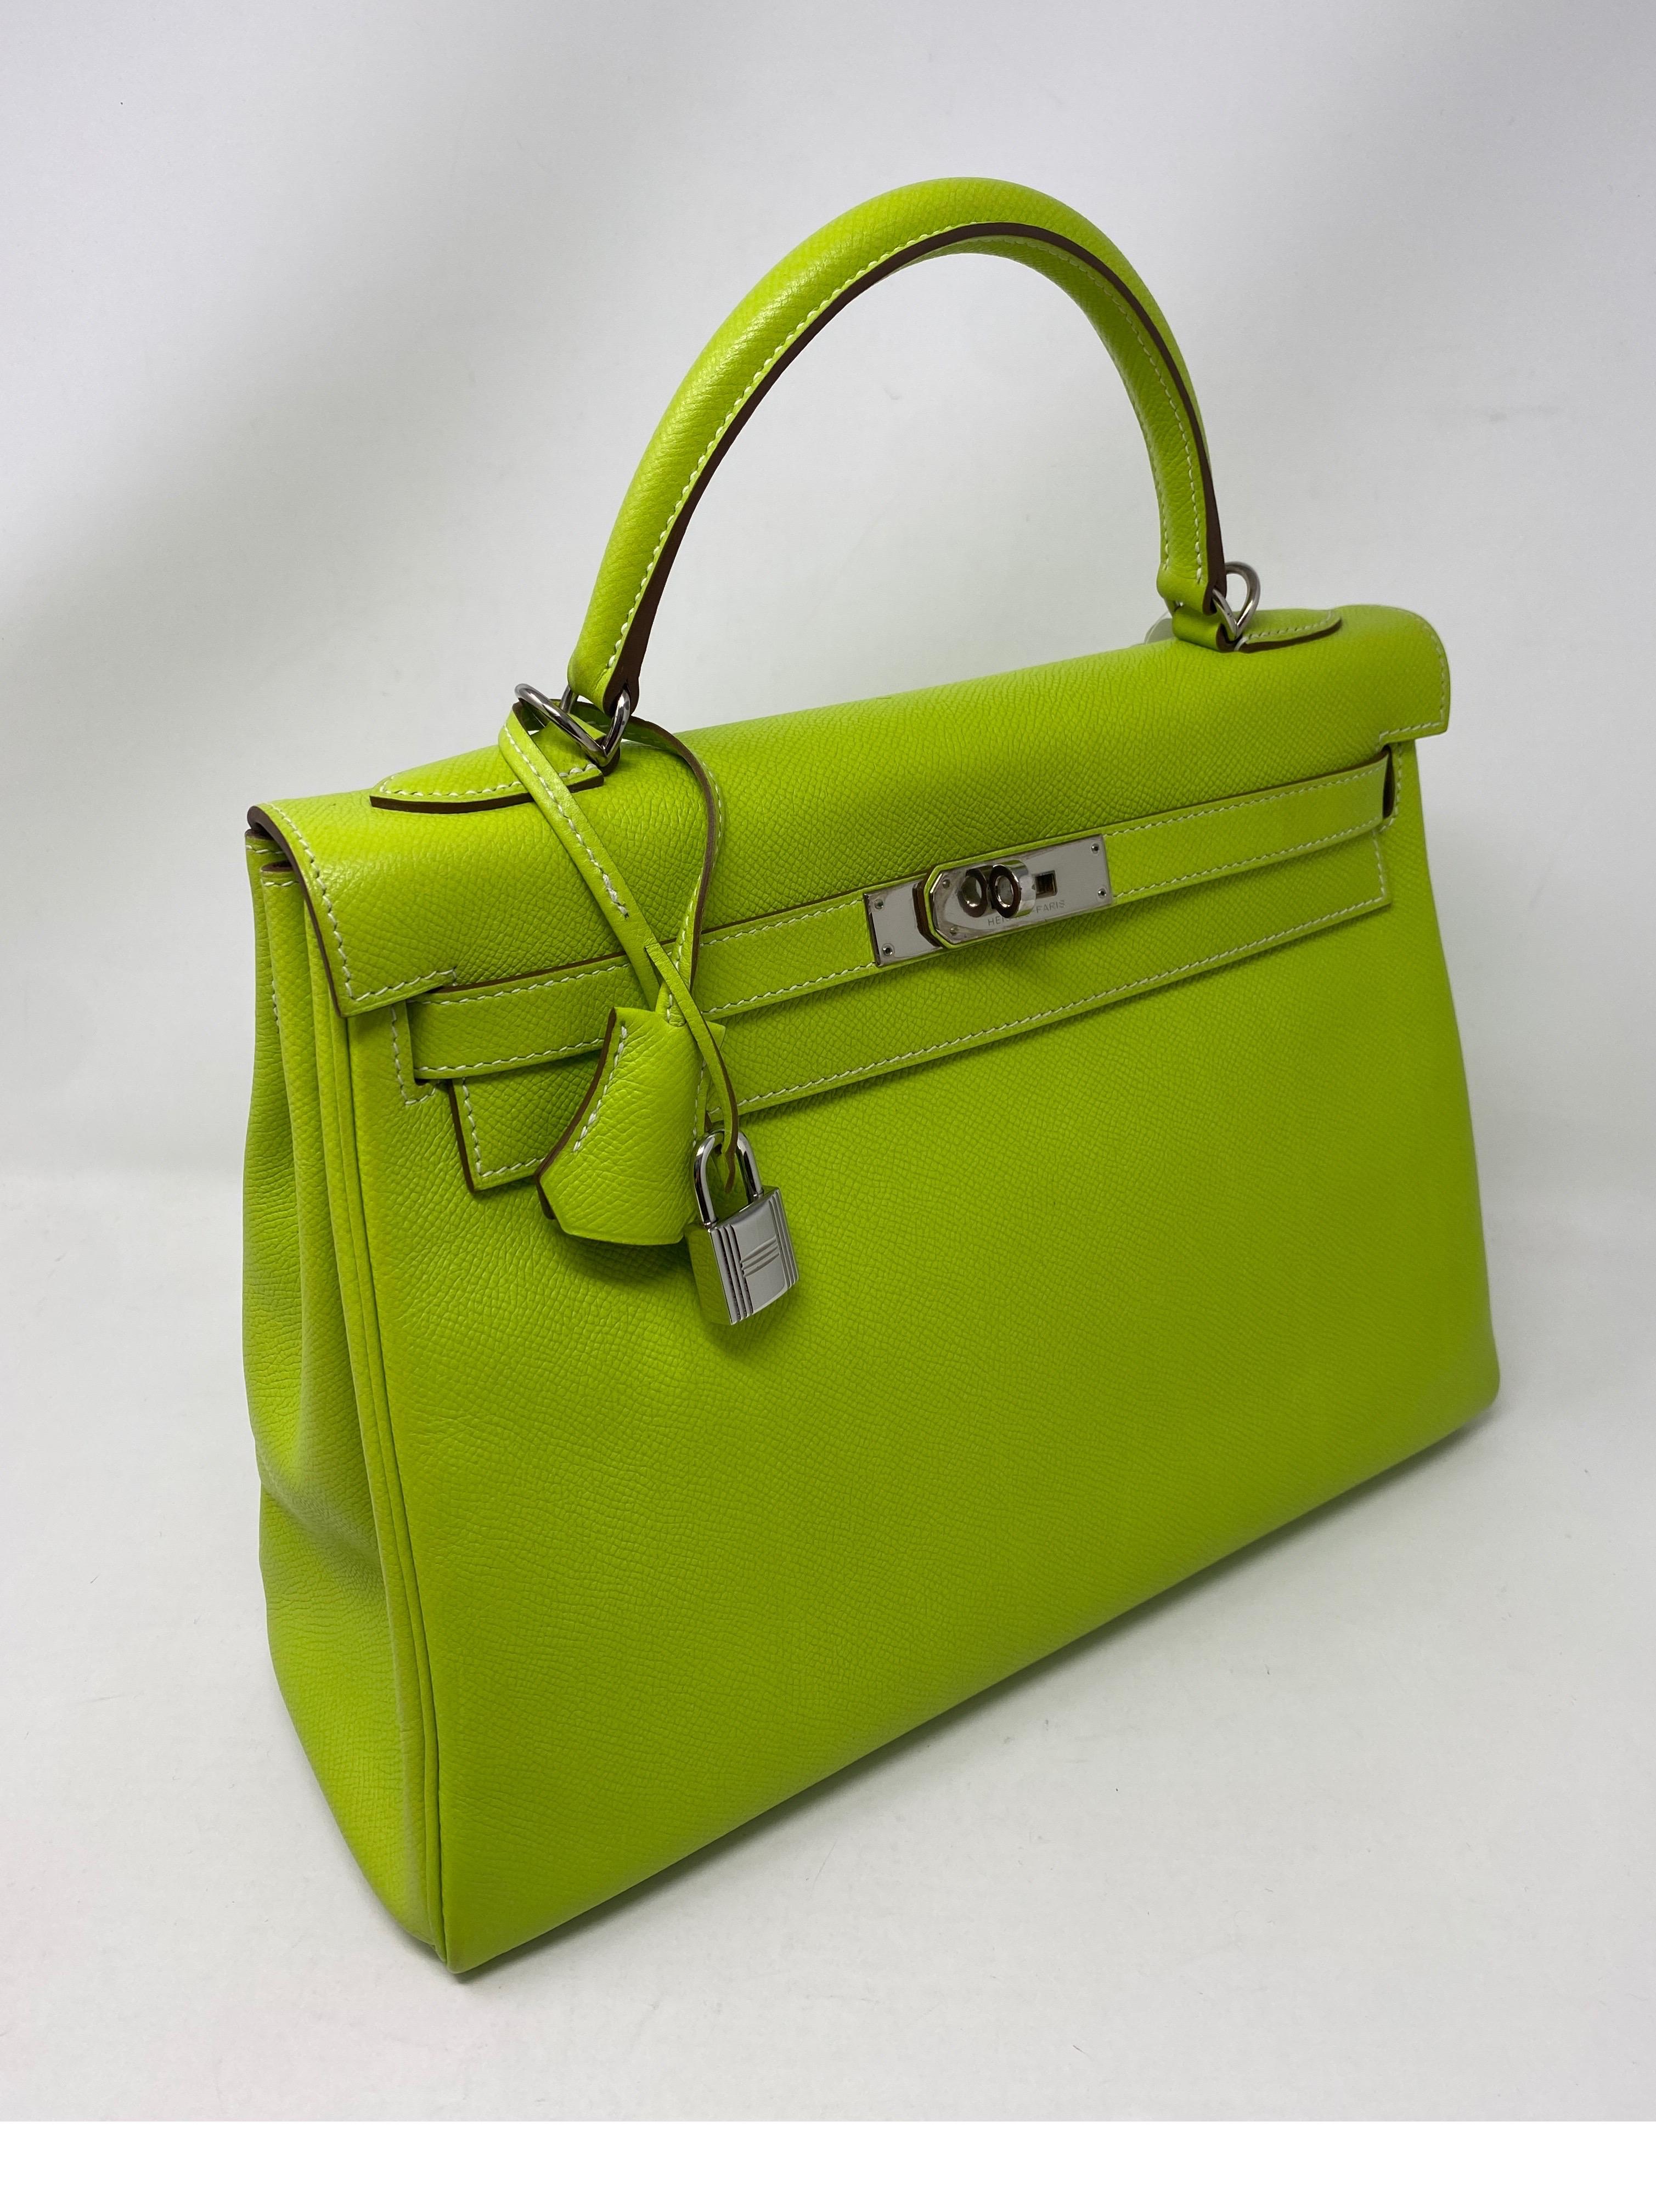 Hermes Kelly 32 Lime and Vert Green Candy Bag. Bright lime green color with palladium hardware. Excellent like new condition. Epsom leather. Candy collection. Inside is vert green color. The most wanted size for Kelly. Comes with strap, clochette,